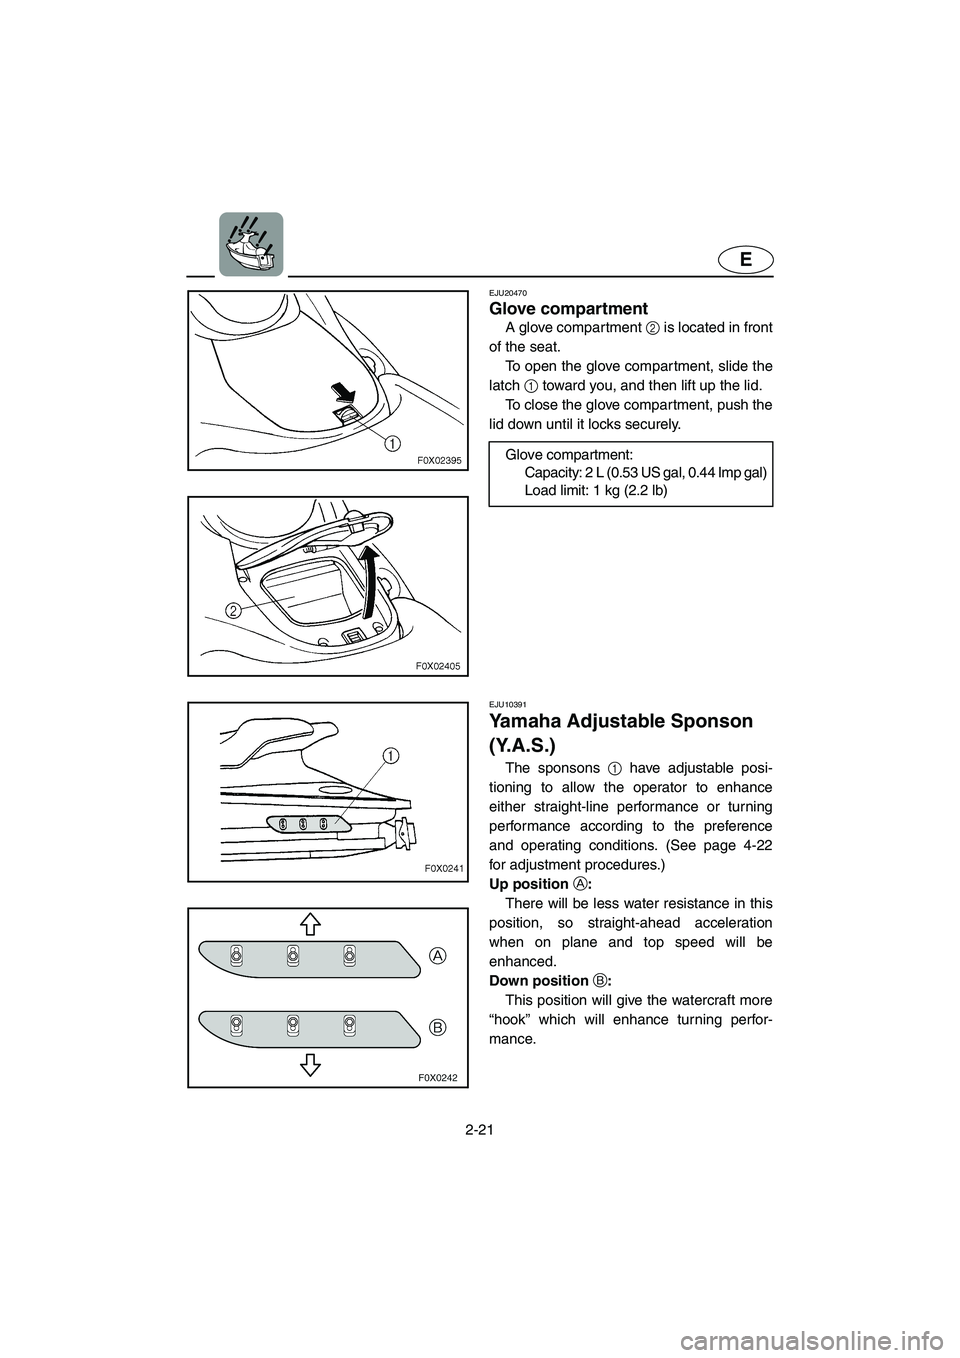 YAMAHA GP1300R 2003 Service Manual 2-21
E
EJU20470 
Glove compartment 
A glove compartment 2 is located in front
of the seat. 
To open the glove compartment, slide the
latch 1 toward you, and then lift up the lid. 
To close the glove c